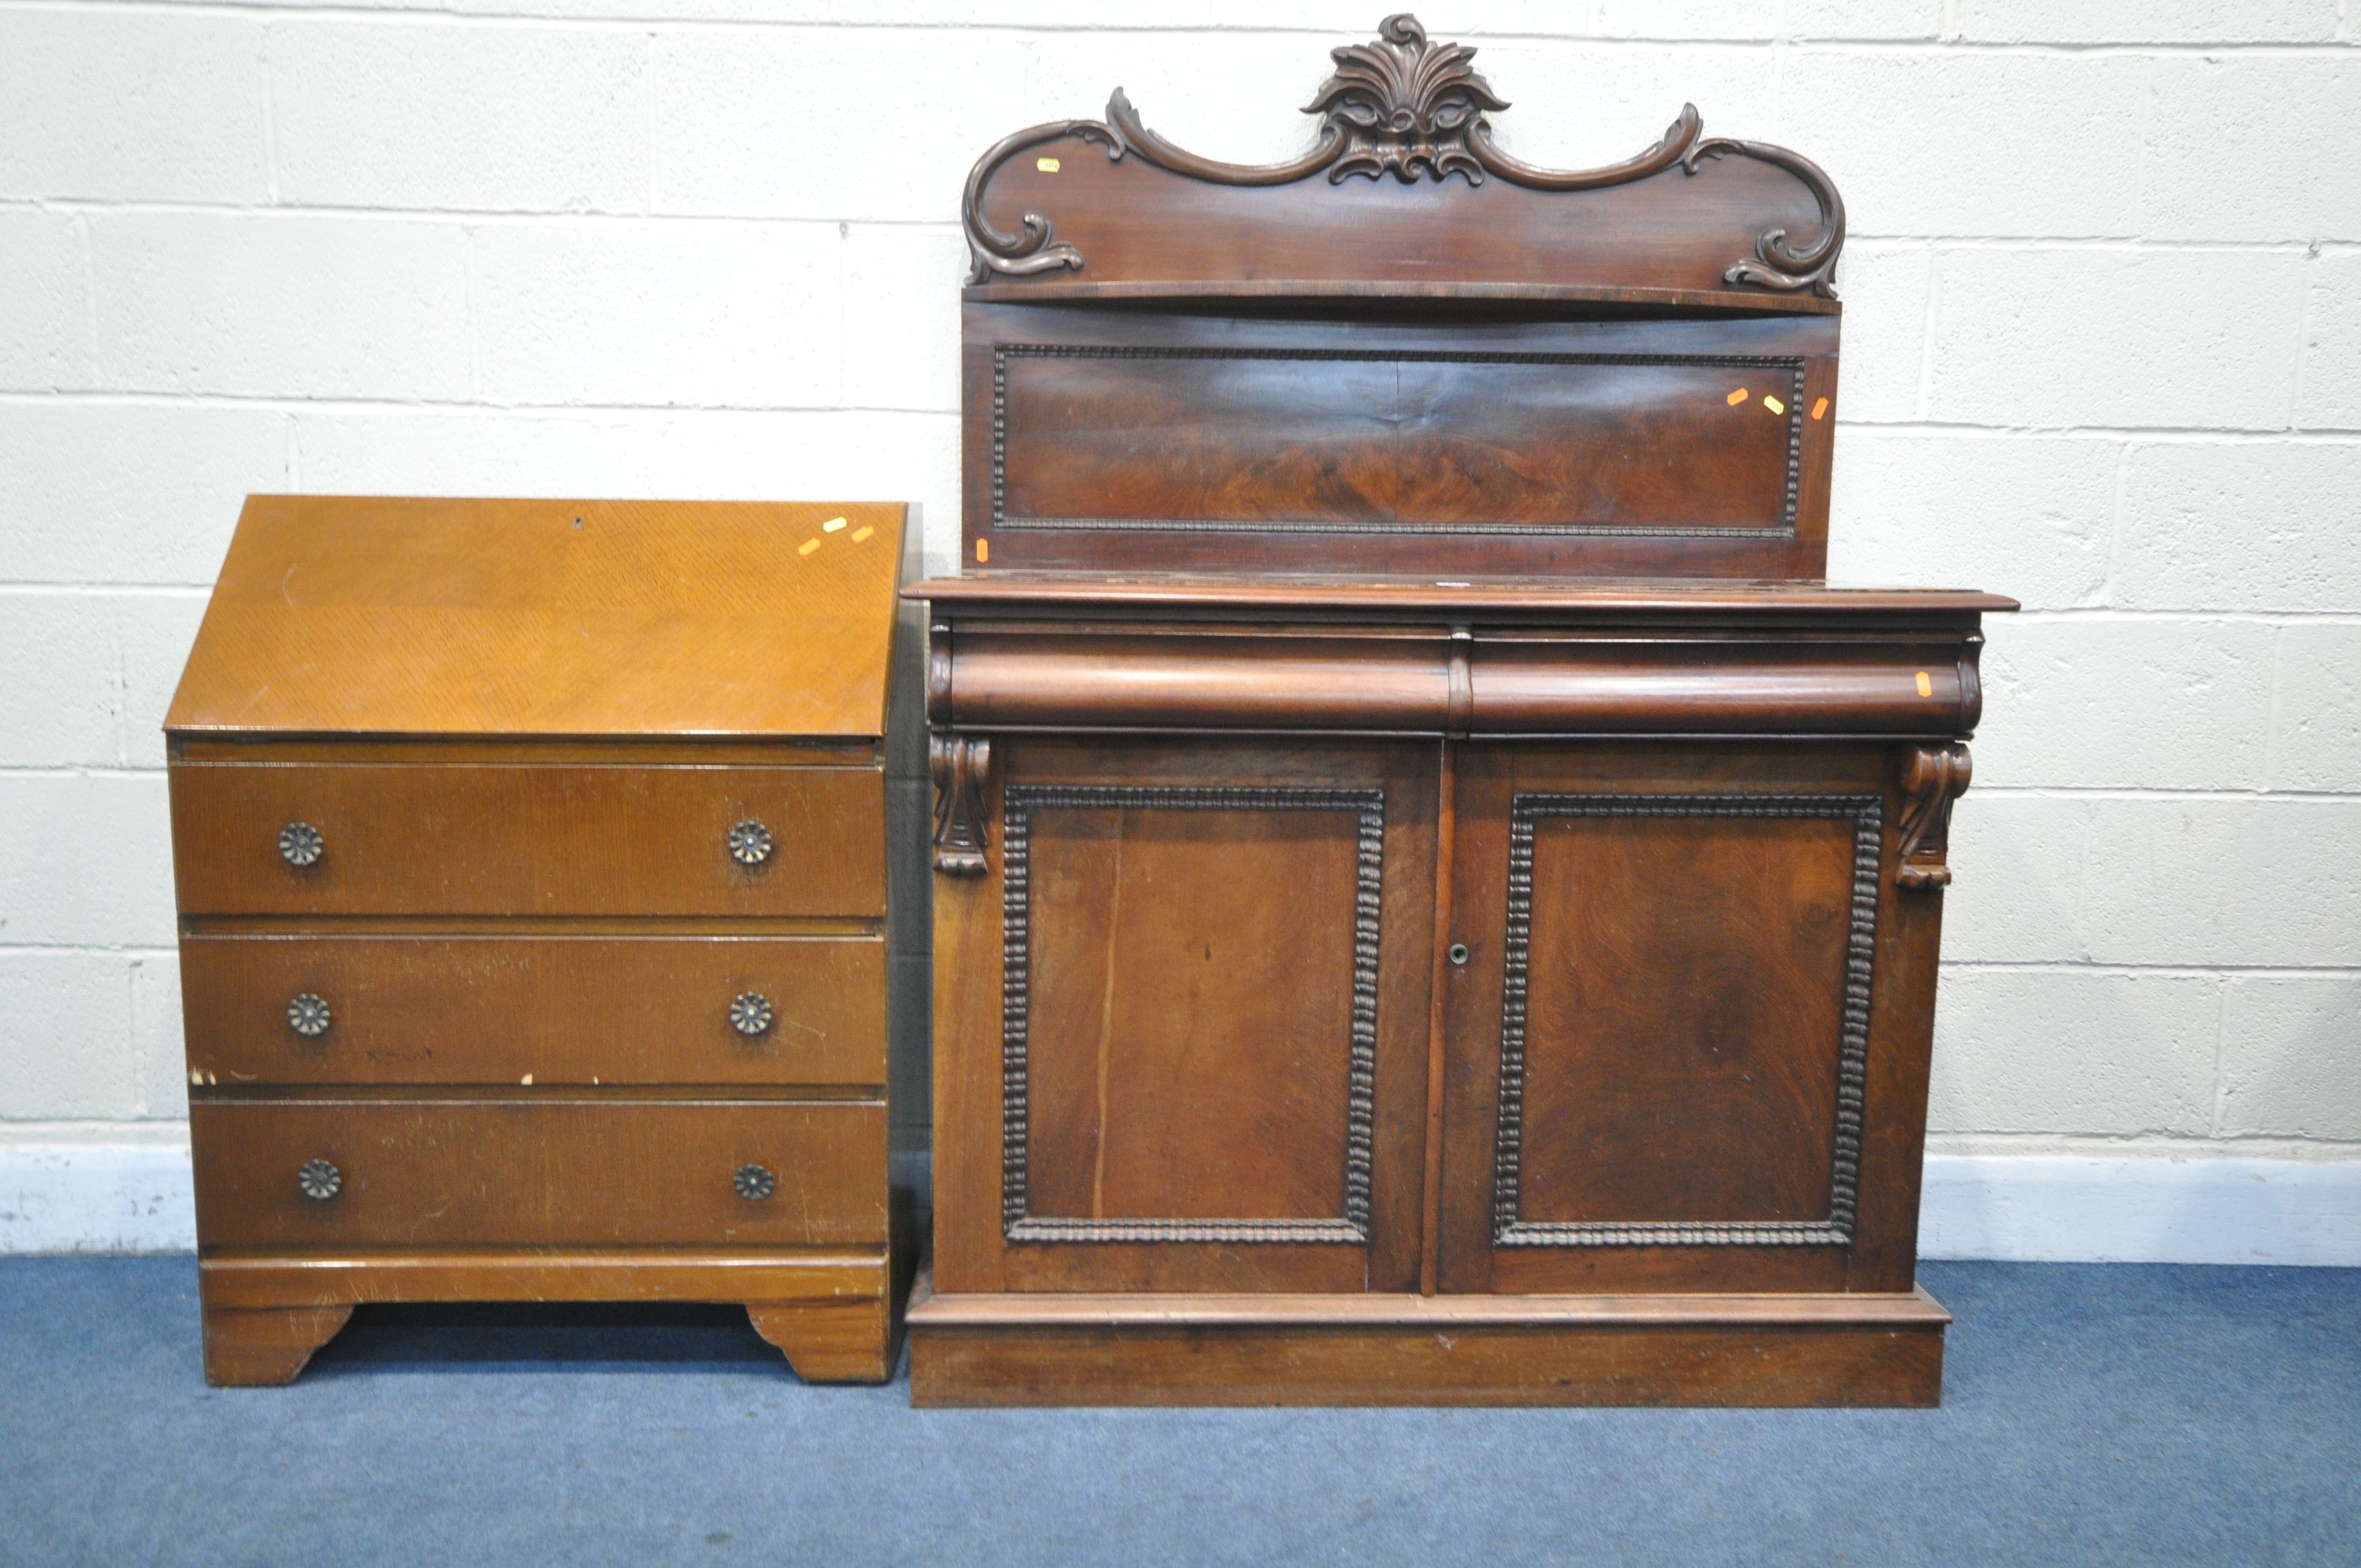 A VICTORIAN MAHOGANY CHIFFONIER, the raised back with scrolled foliate details and a single shelf,